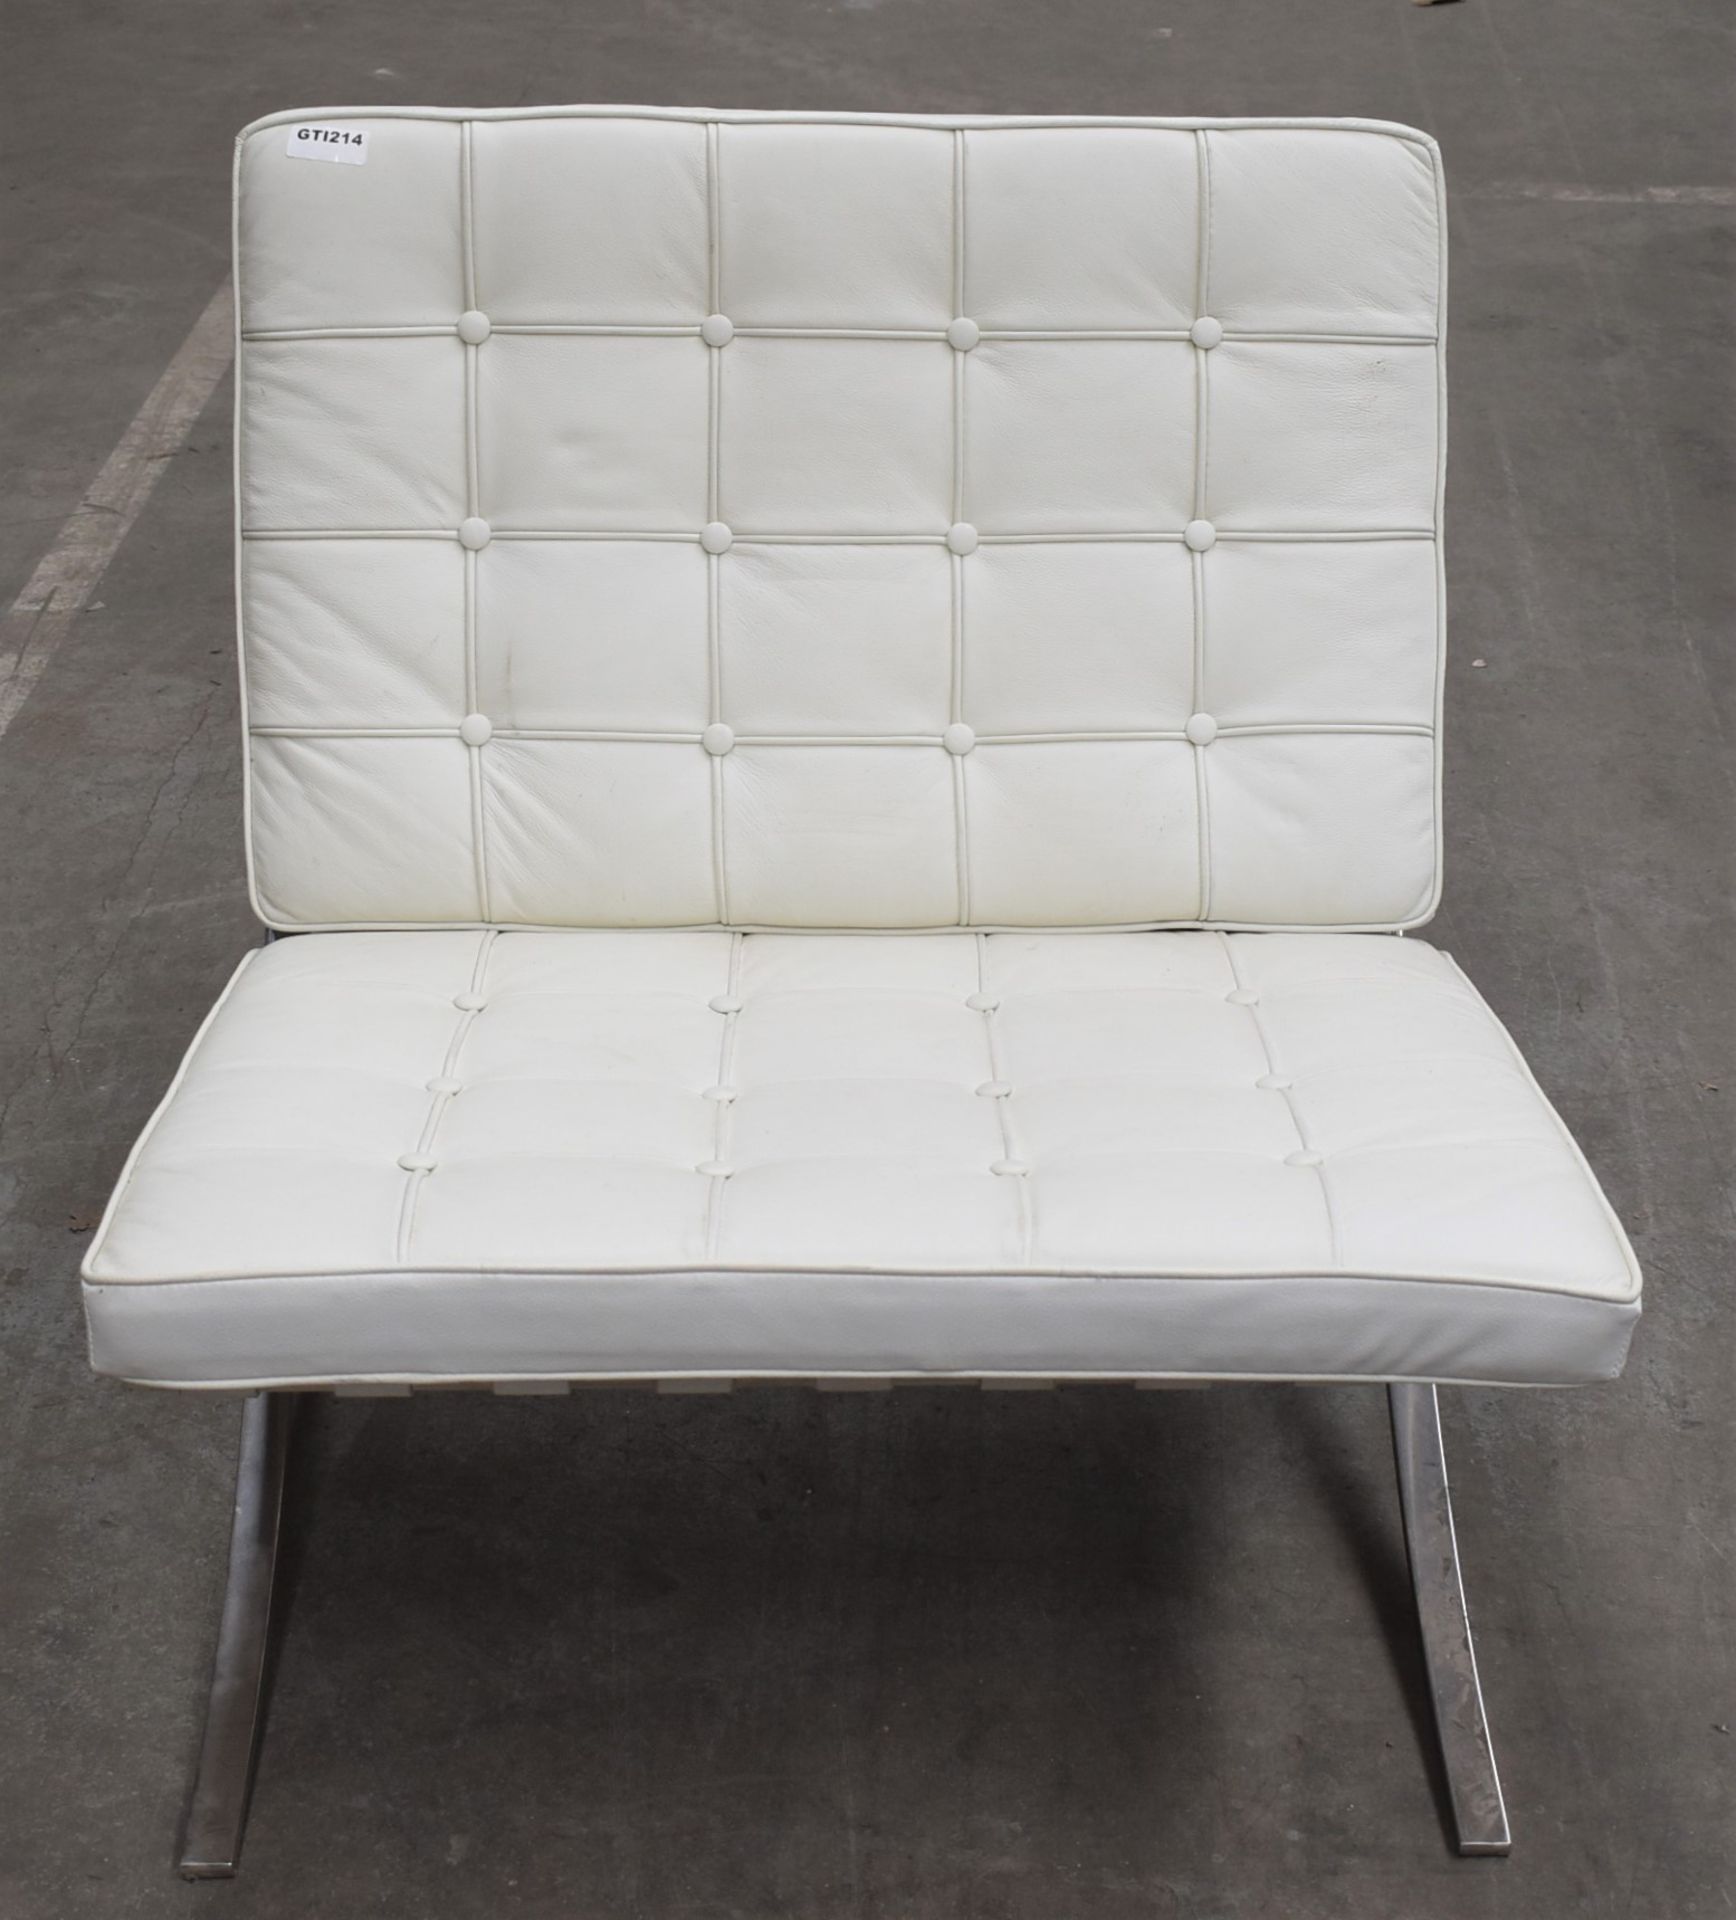 1 x Contemporary Lounge Chair With Strap Supports, Chrome Base and White Leather Studded Seat and - Image 3 of 9